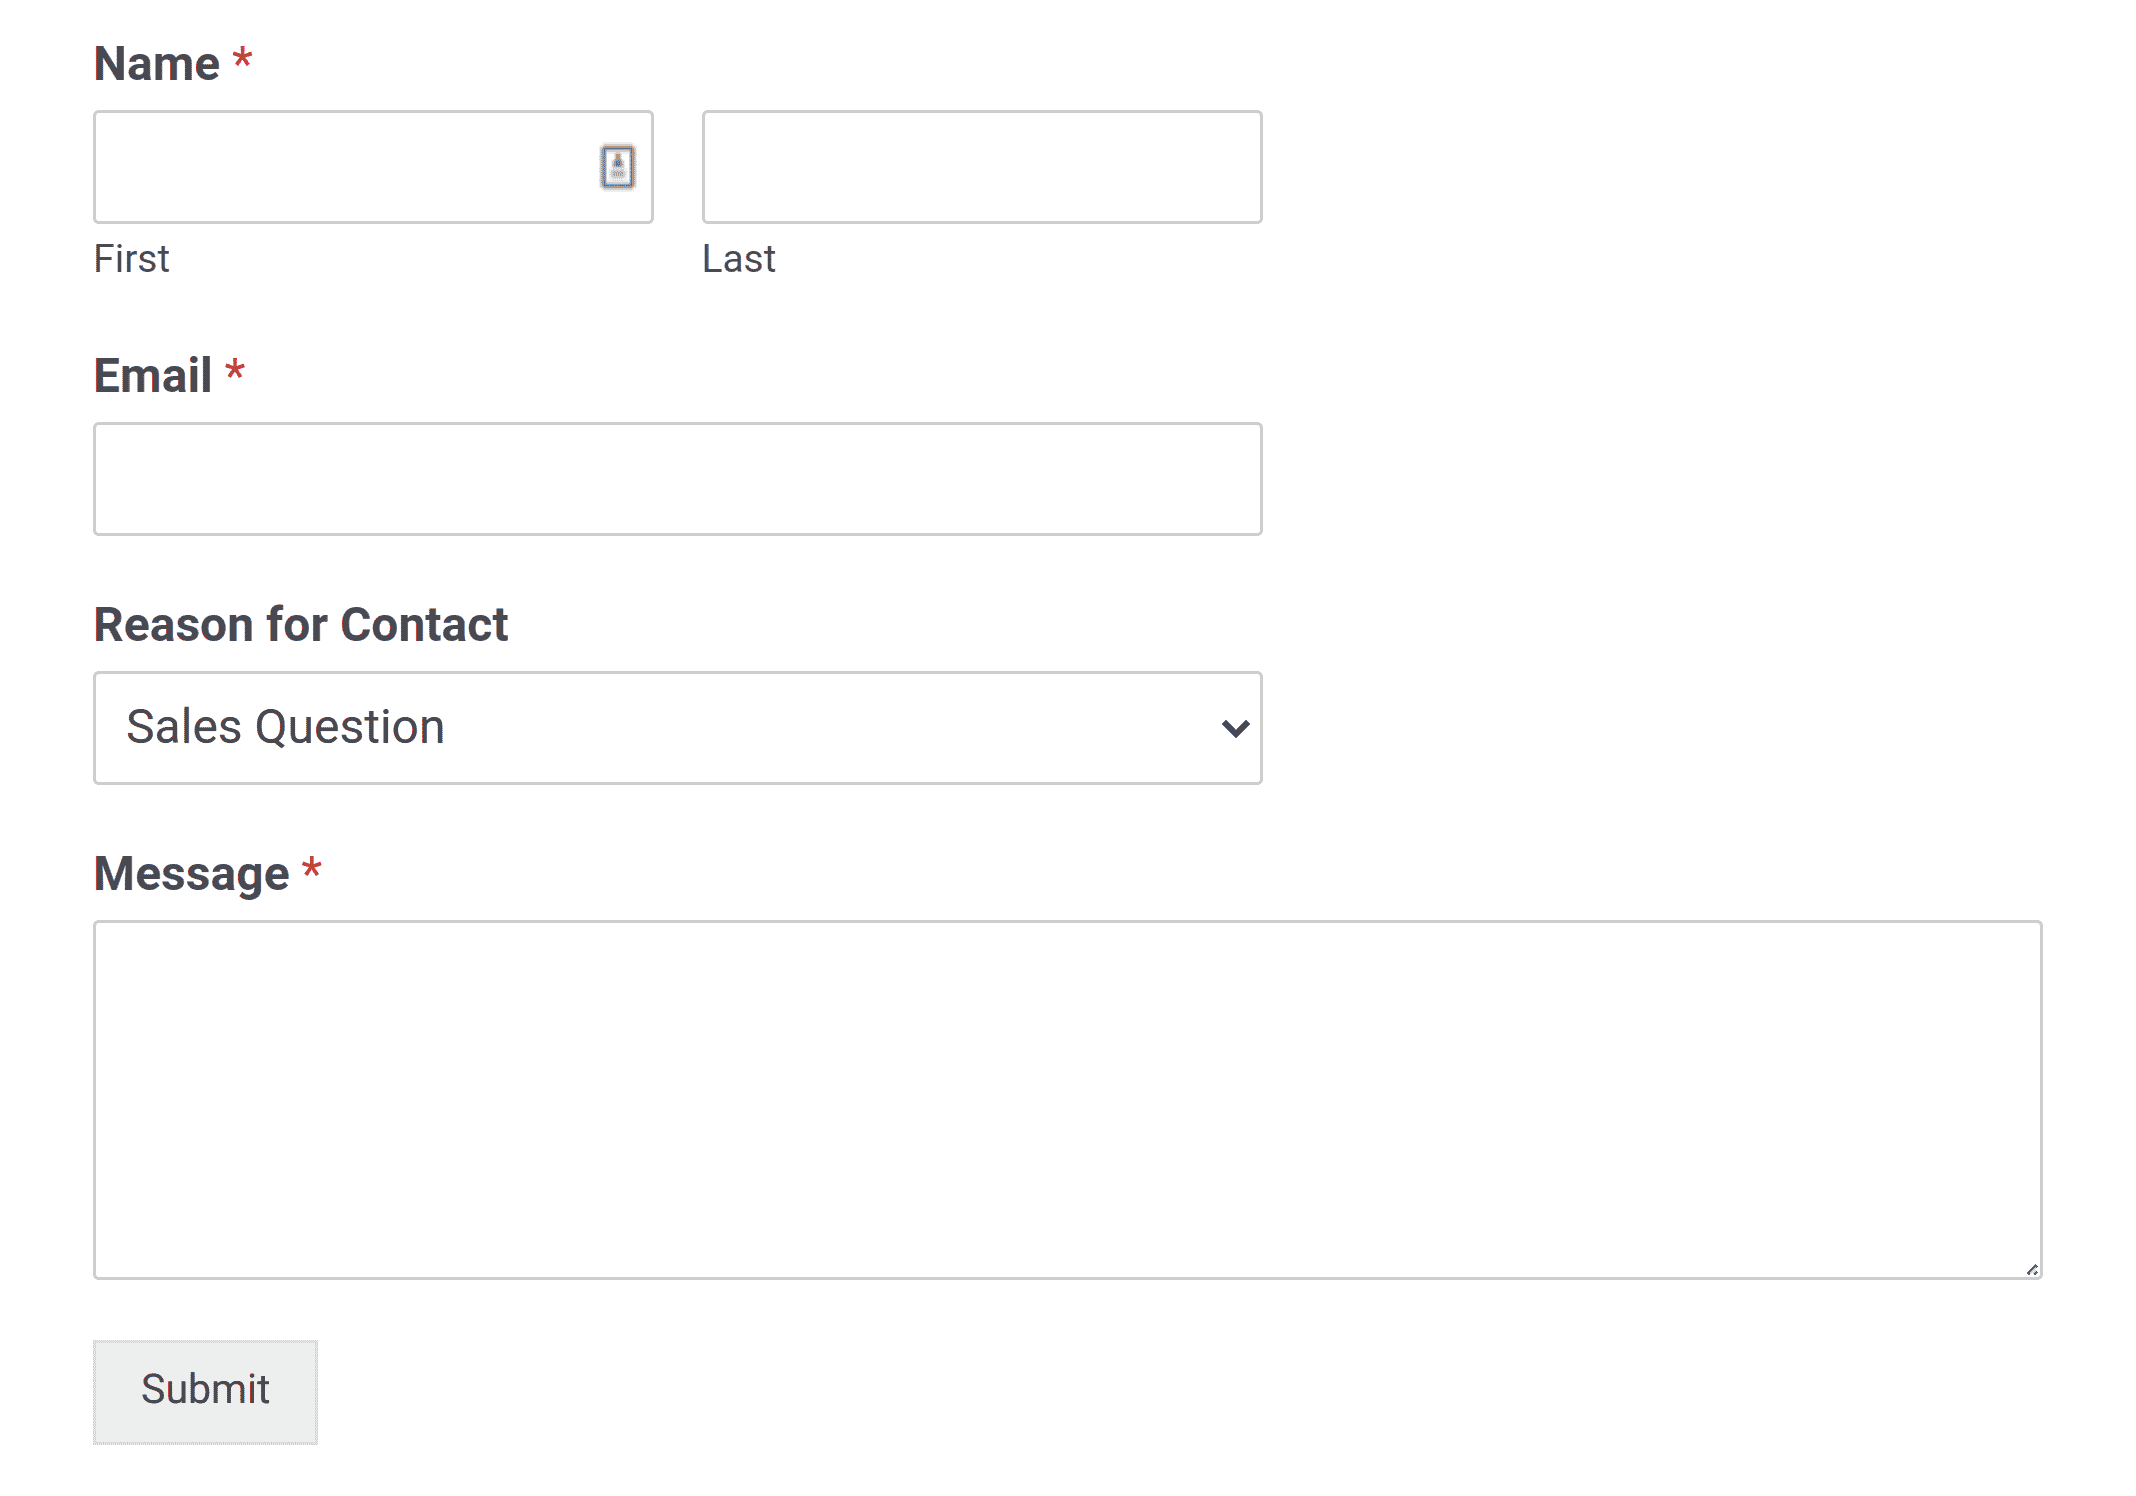 Adding some data to a form to test a Salesforce connection